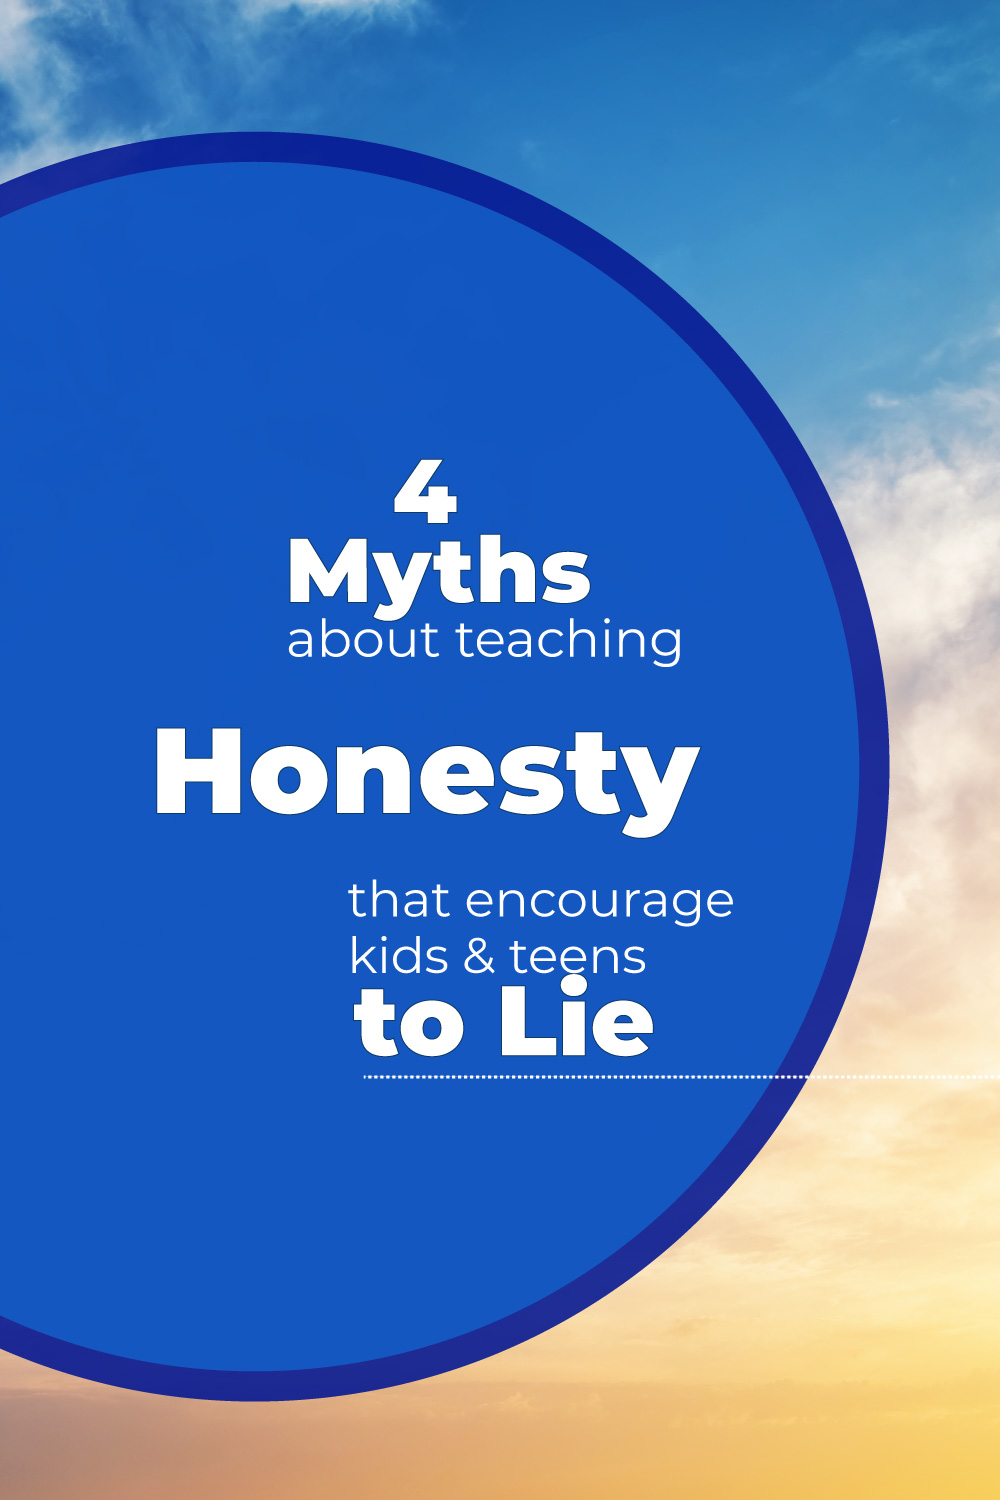 Common parenting myths about teaching honesty that encourage kids and teens to lie